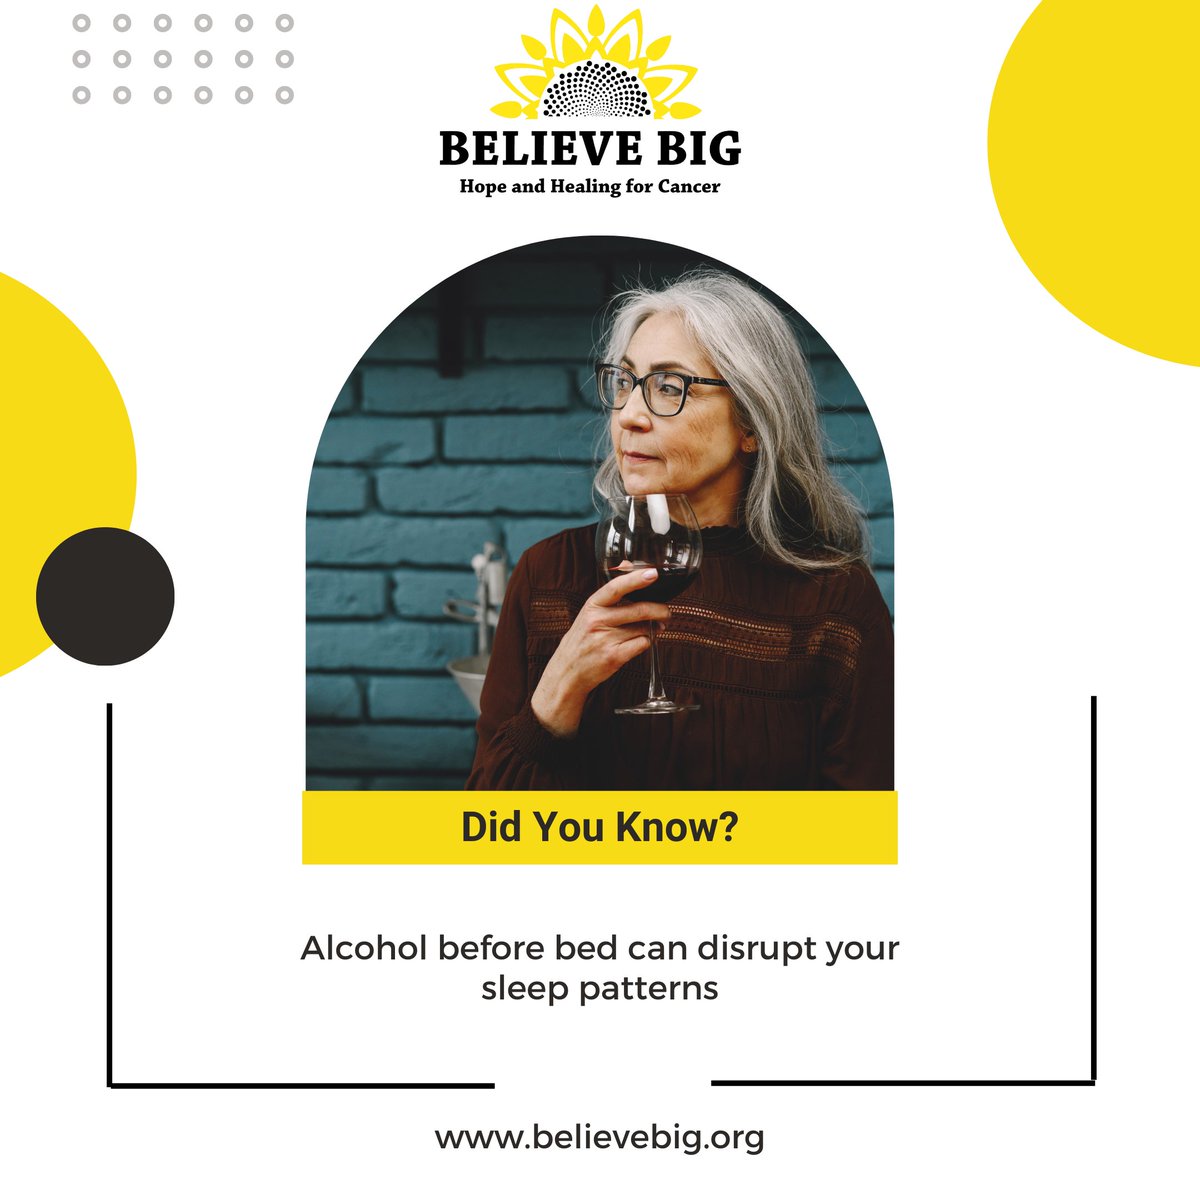 Alcohol before bed can disrupt your sleep patterns. It may make you fall asleep faster, but it can also lead to waking up in the middle of the night. The fluctuation of sleep-inducing chemicals in your brain can leave you feeling restless and less refreshed in the morning.